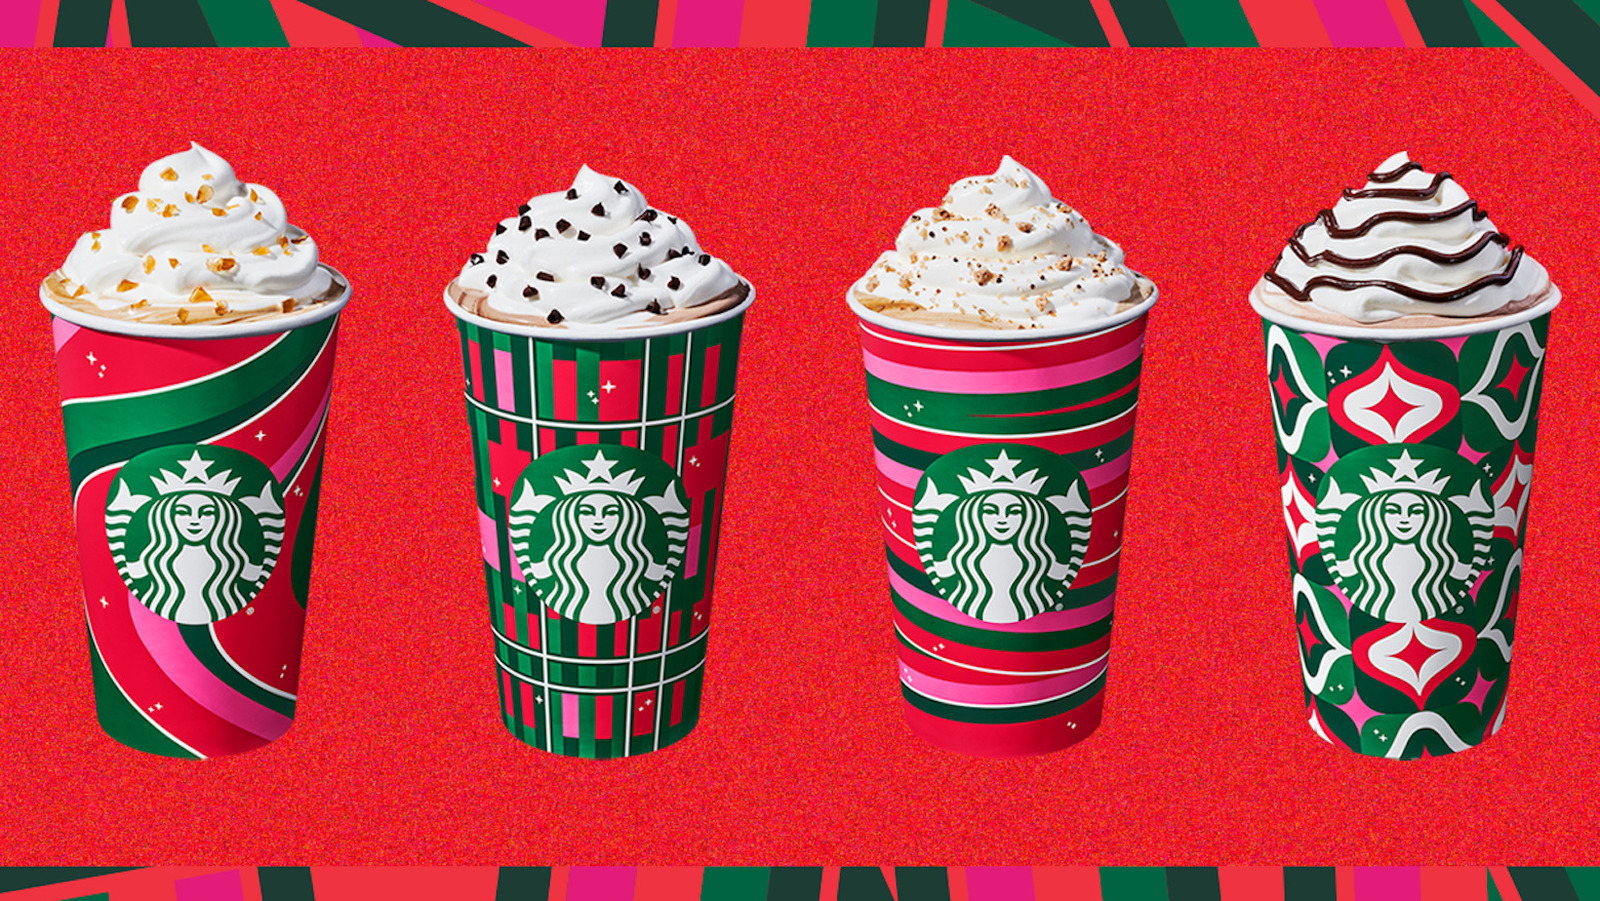 https://www.tastingtable.com/img/gallery/starbucks-goes-full-holiday-mode-with-new-menu-items-cocktails-and-festive-cups/l-intro-1698792870.jpg